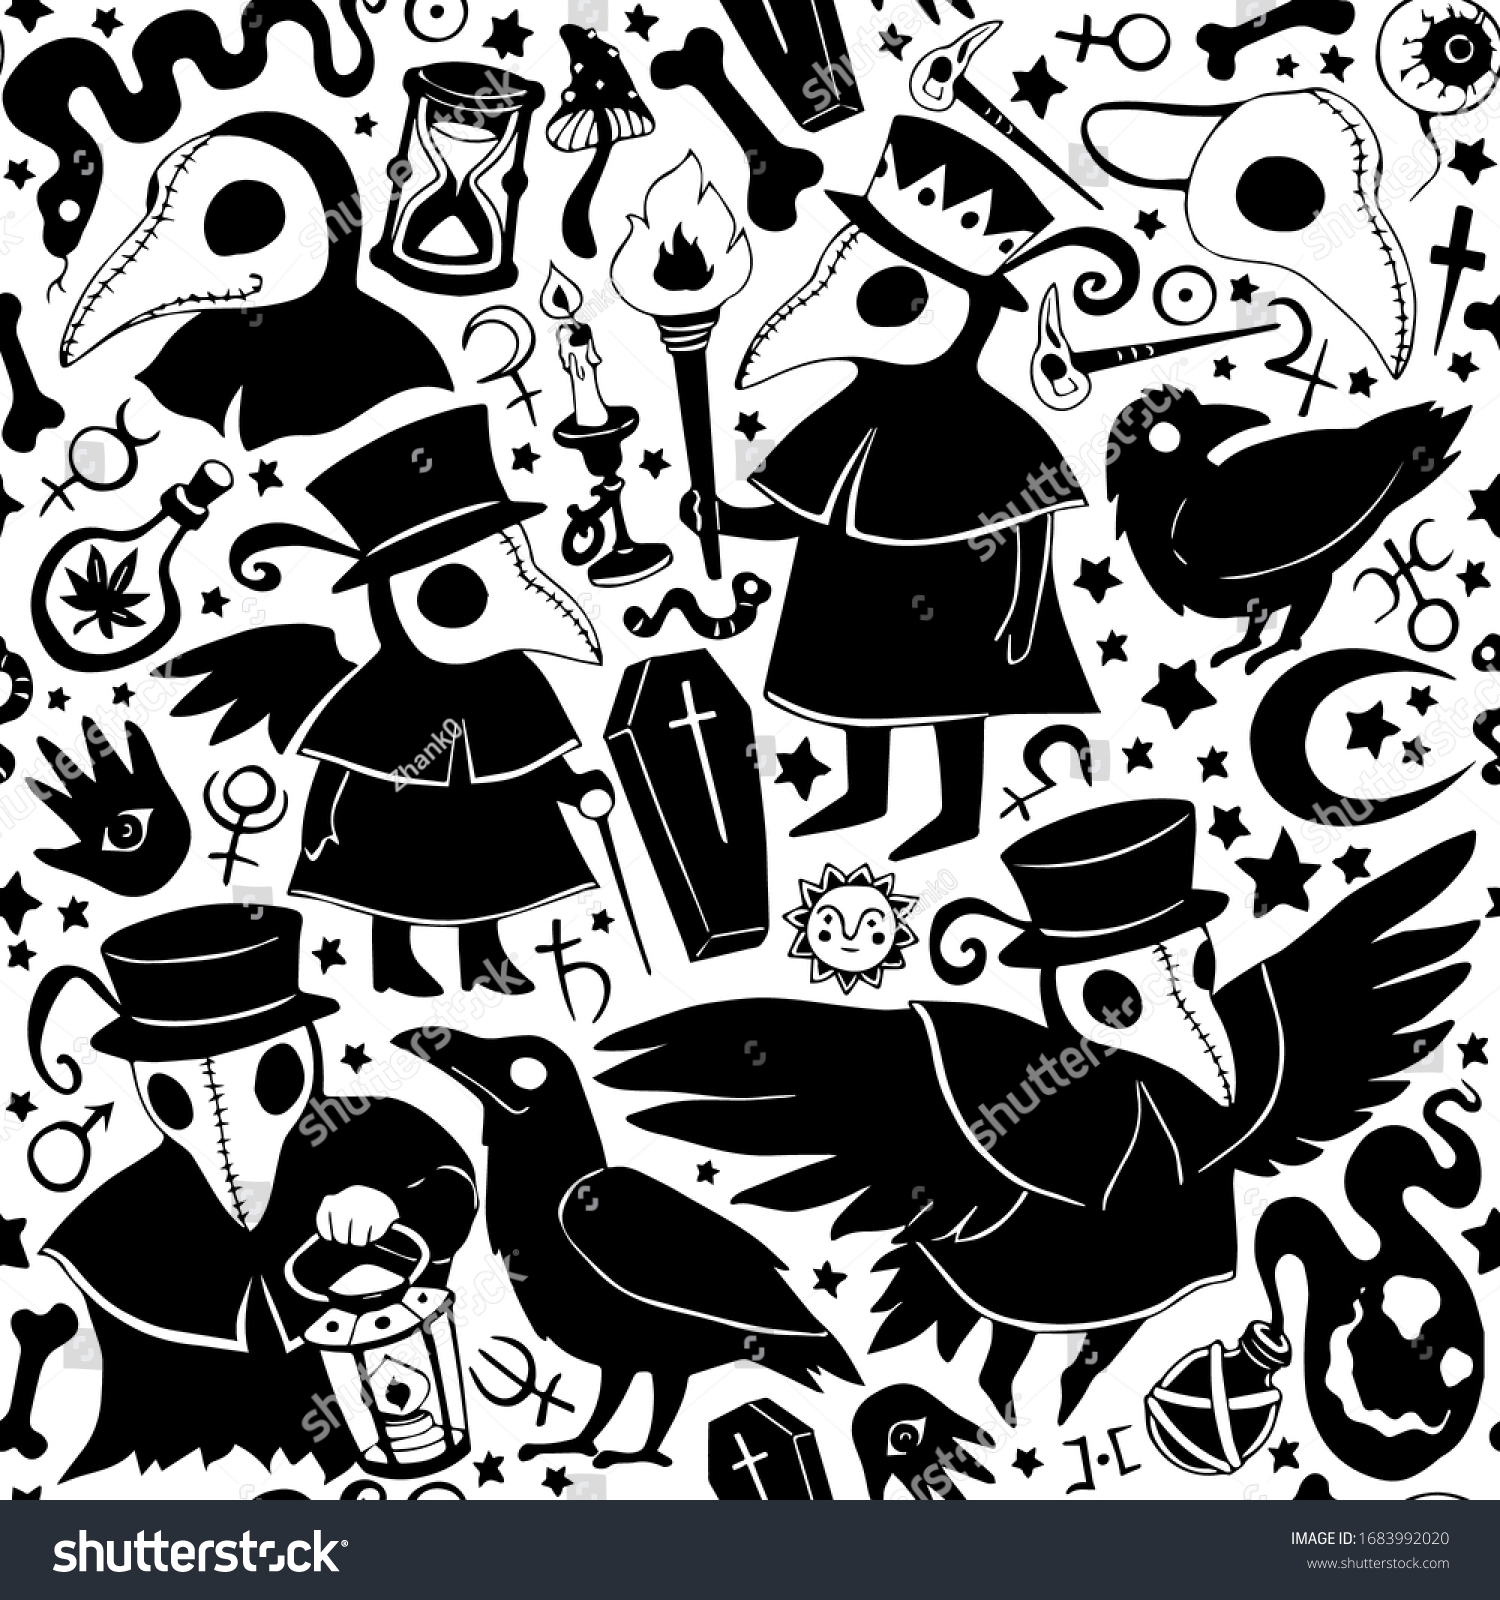 SVG of Vector black and white graphic cartoon pattern with plague doctors and crows isolated on the white background. Seamless pattern can be used for wallpaper, pattern fills, web page background, texture svg